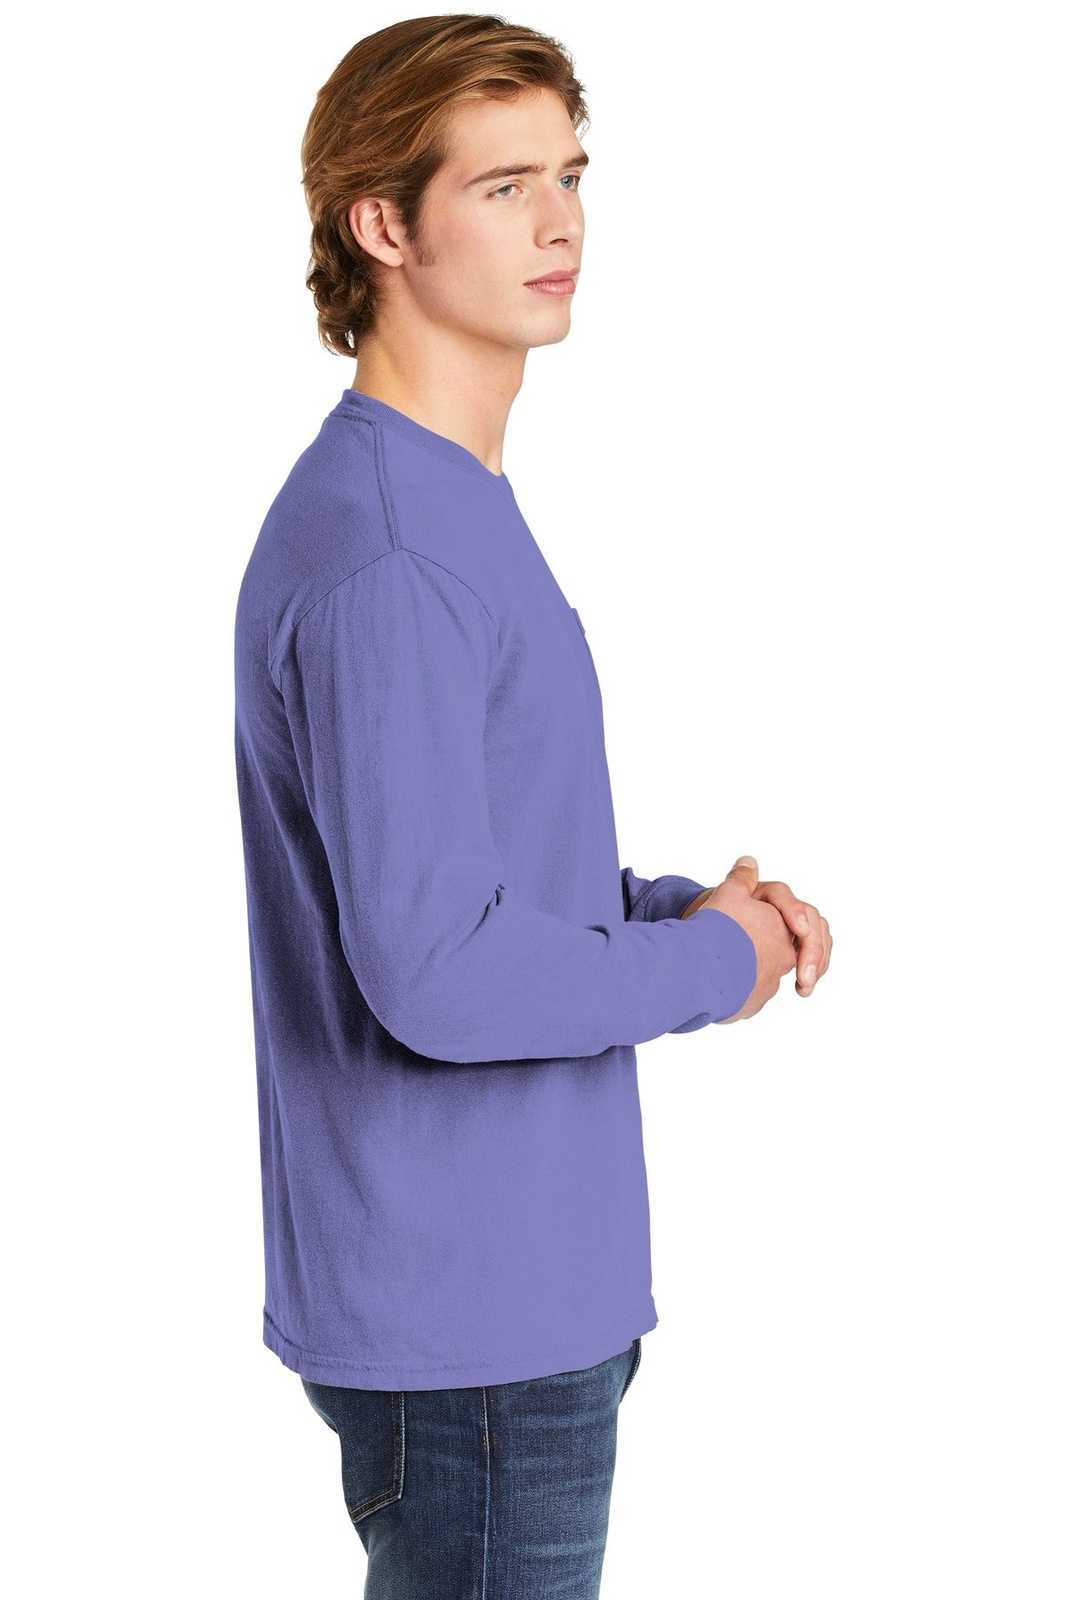 Comfort Colors 4410 Heavyweight Ring Spun Long Sleeve Pocket Tee - Violet - HIT a Double